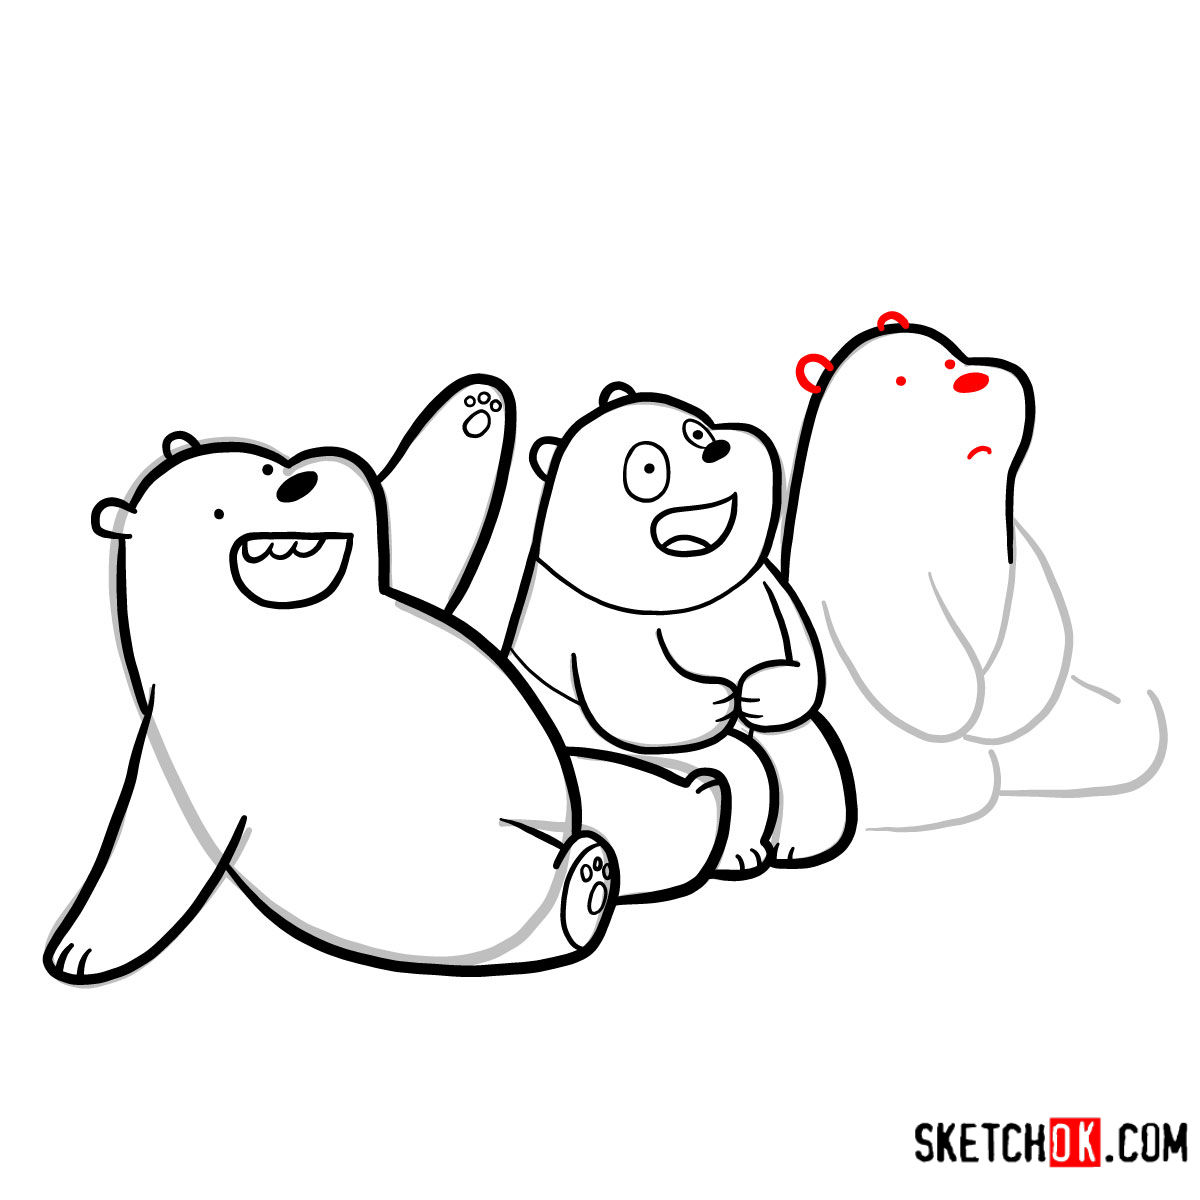 How to draw all three bears together | We Bare Bears - step 17